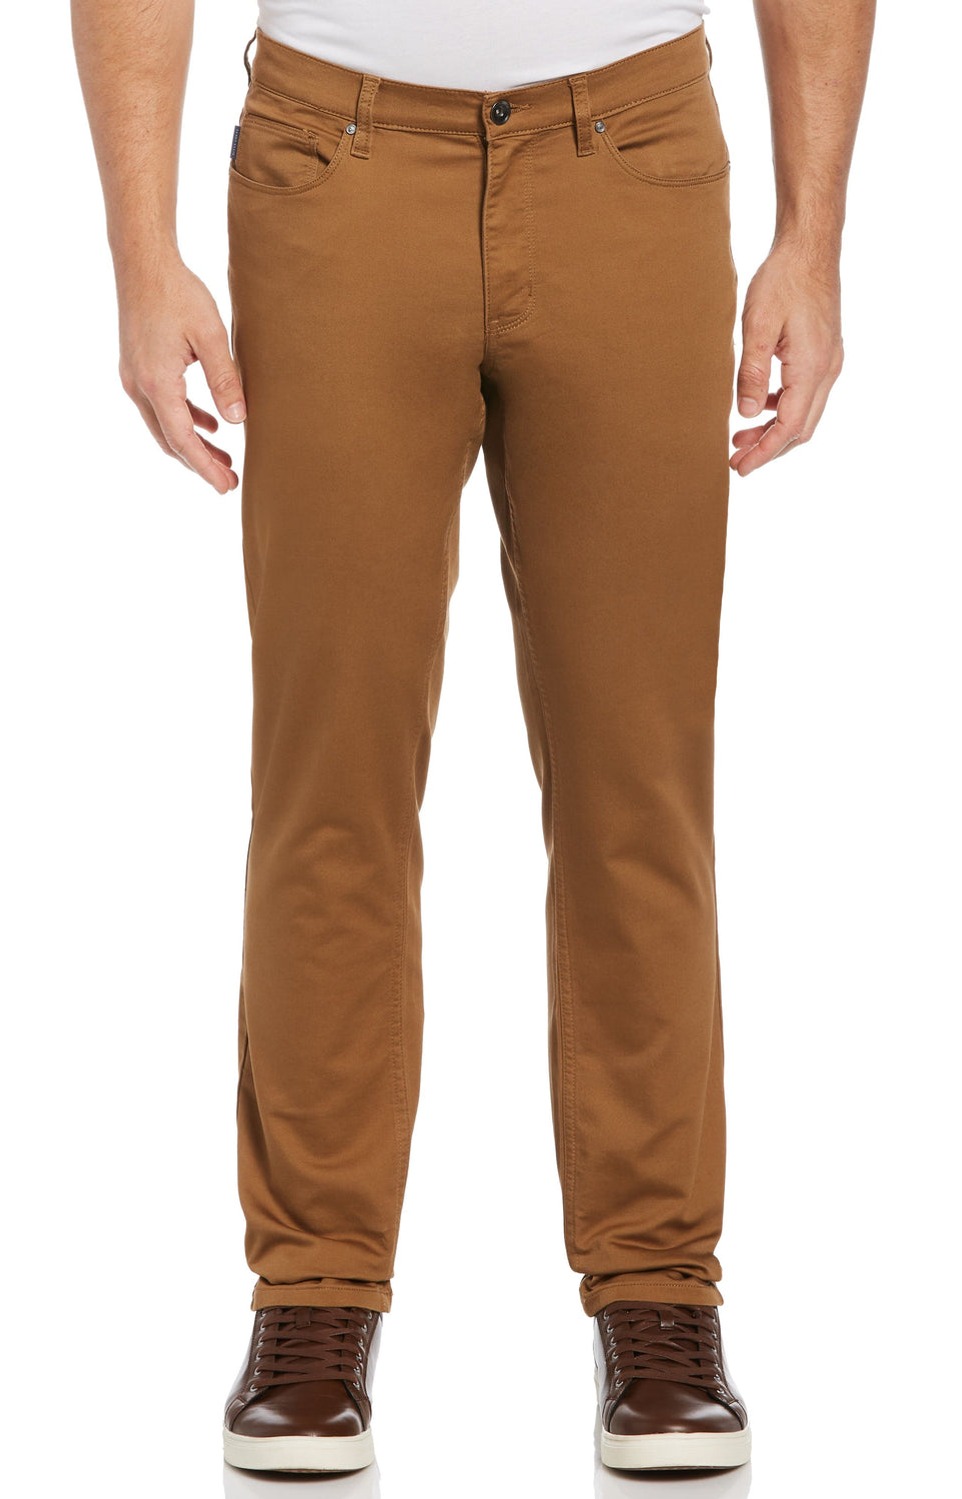 Perry Ellis Slim Fit Pants $13 (Big & Tall) Free Shipping on $50+